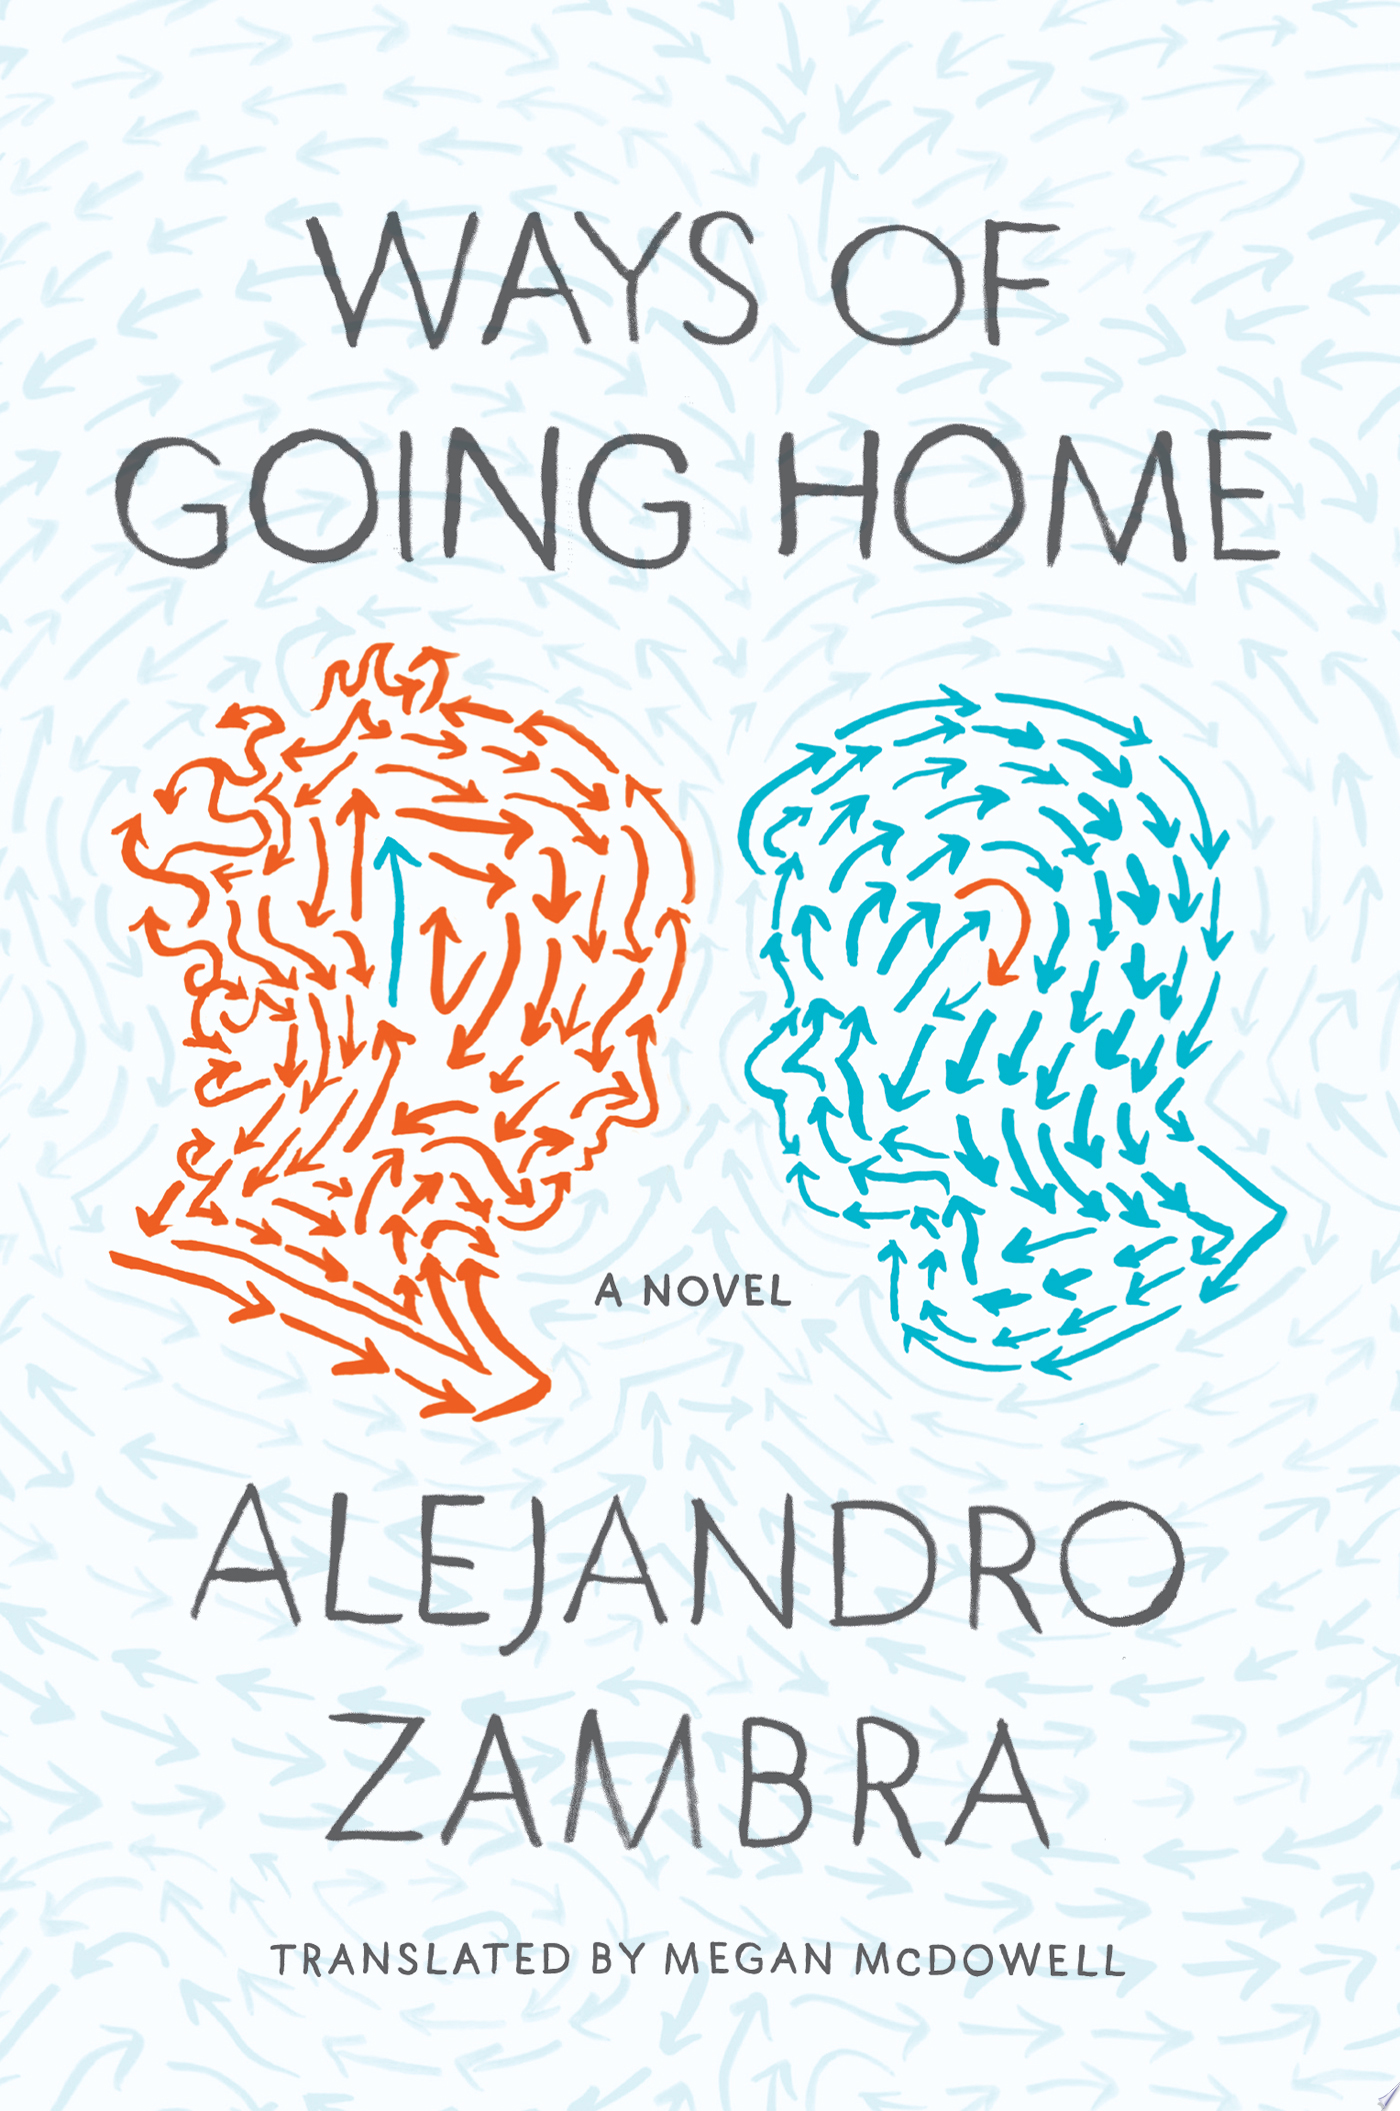 Image for "Ways of Going Home"